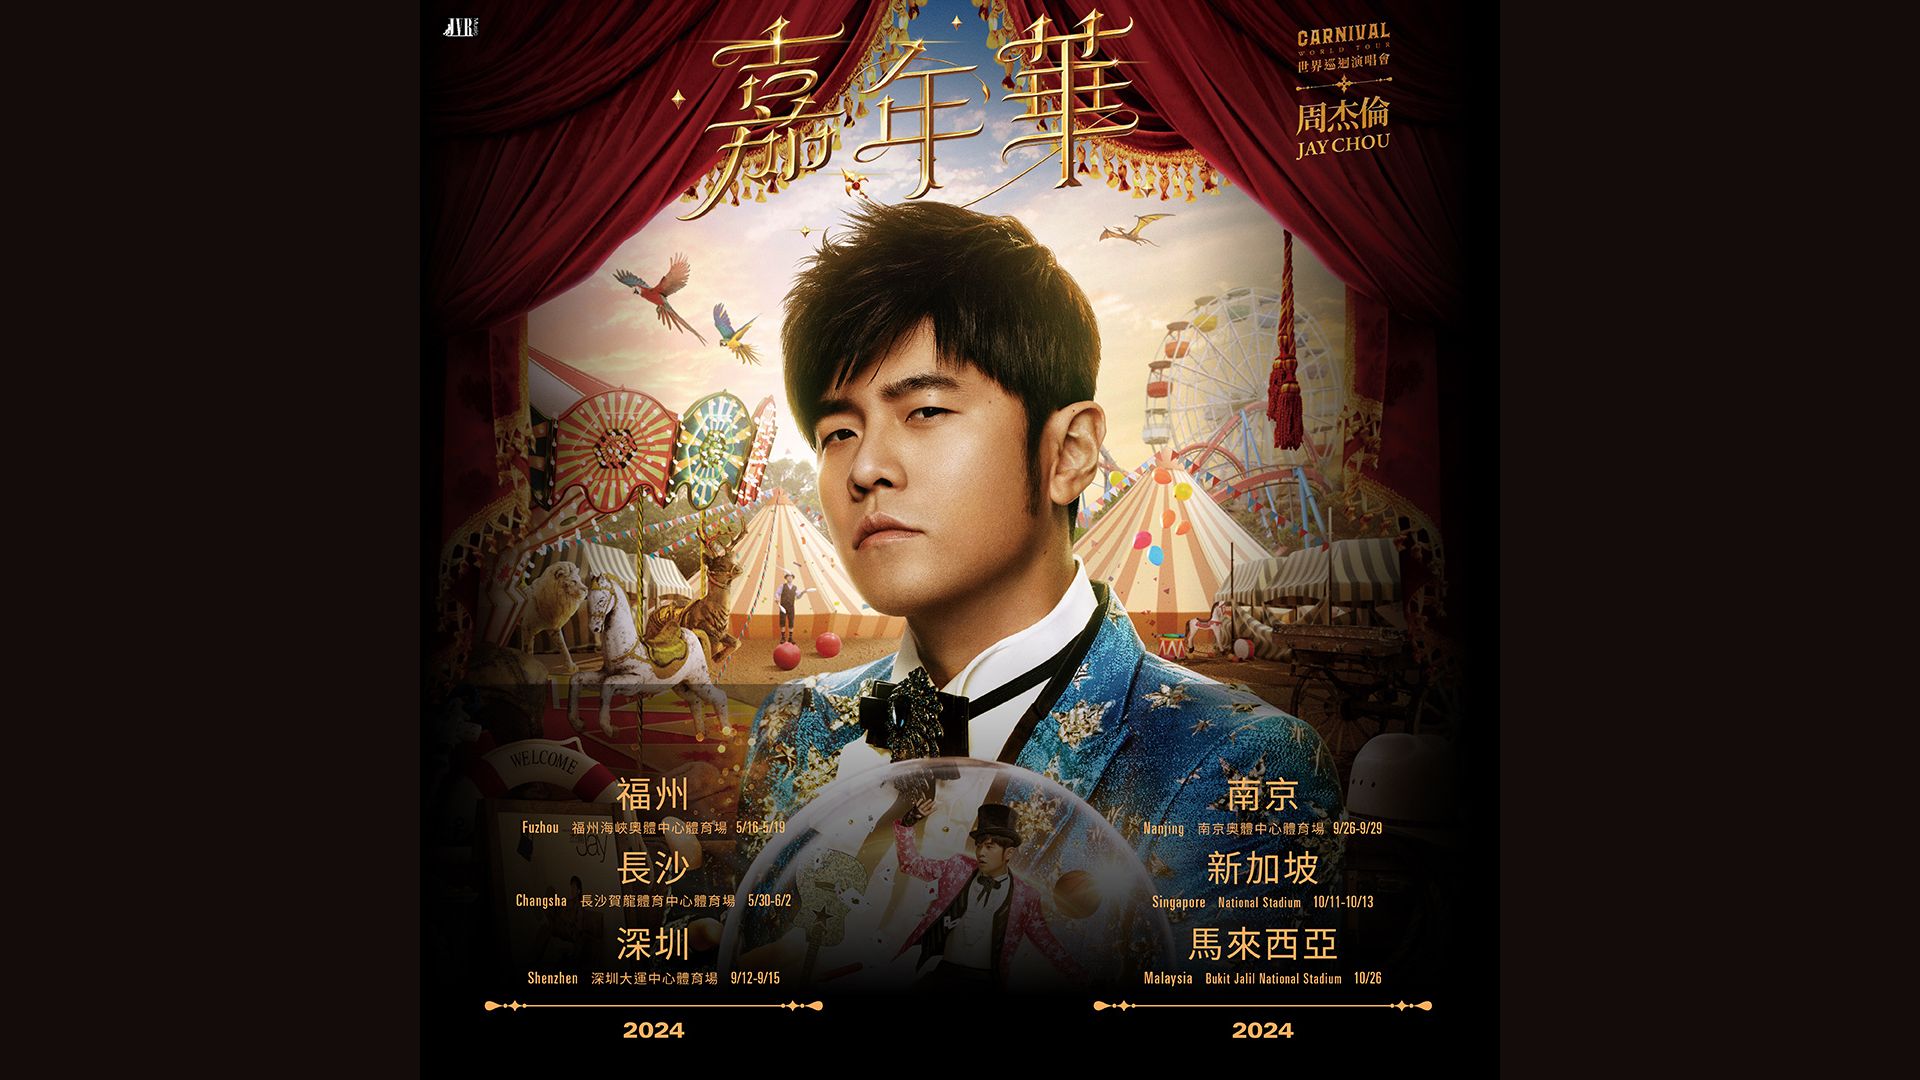 Jay Chou set to thrill fans with one-night only concert at Bukit Jalil Stadium